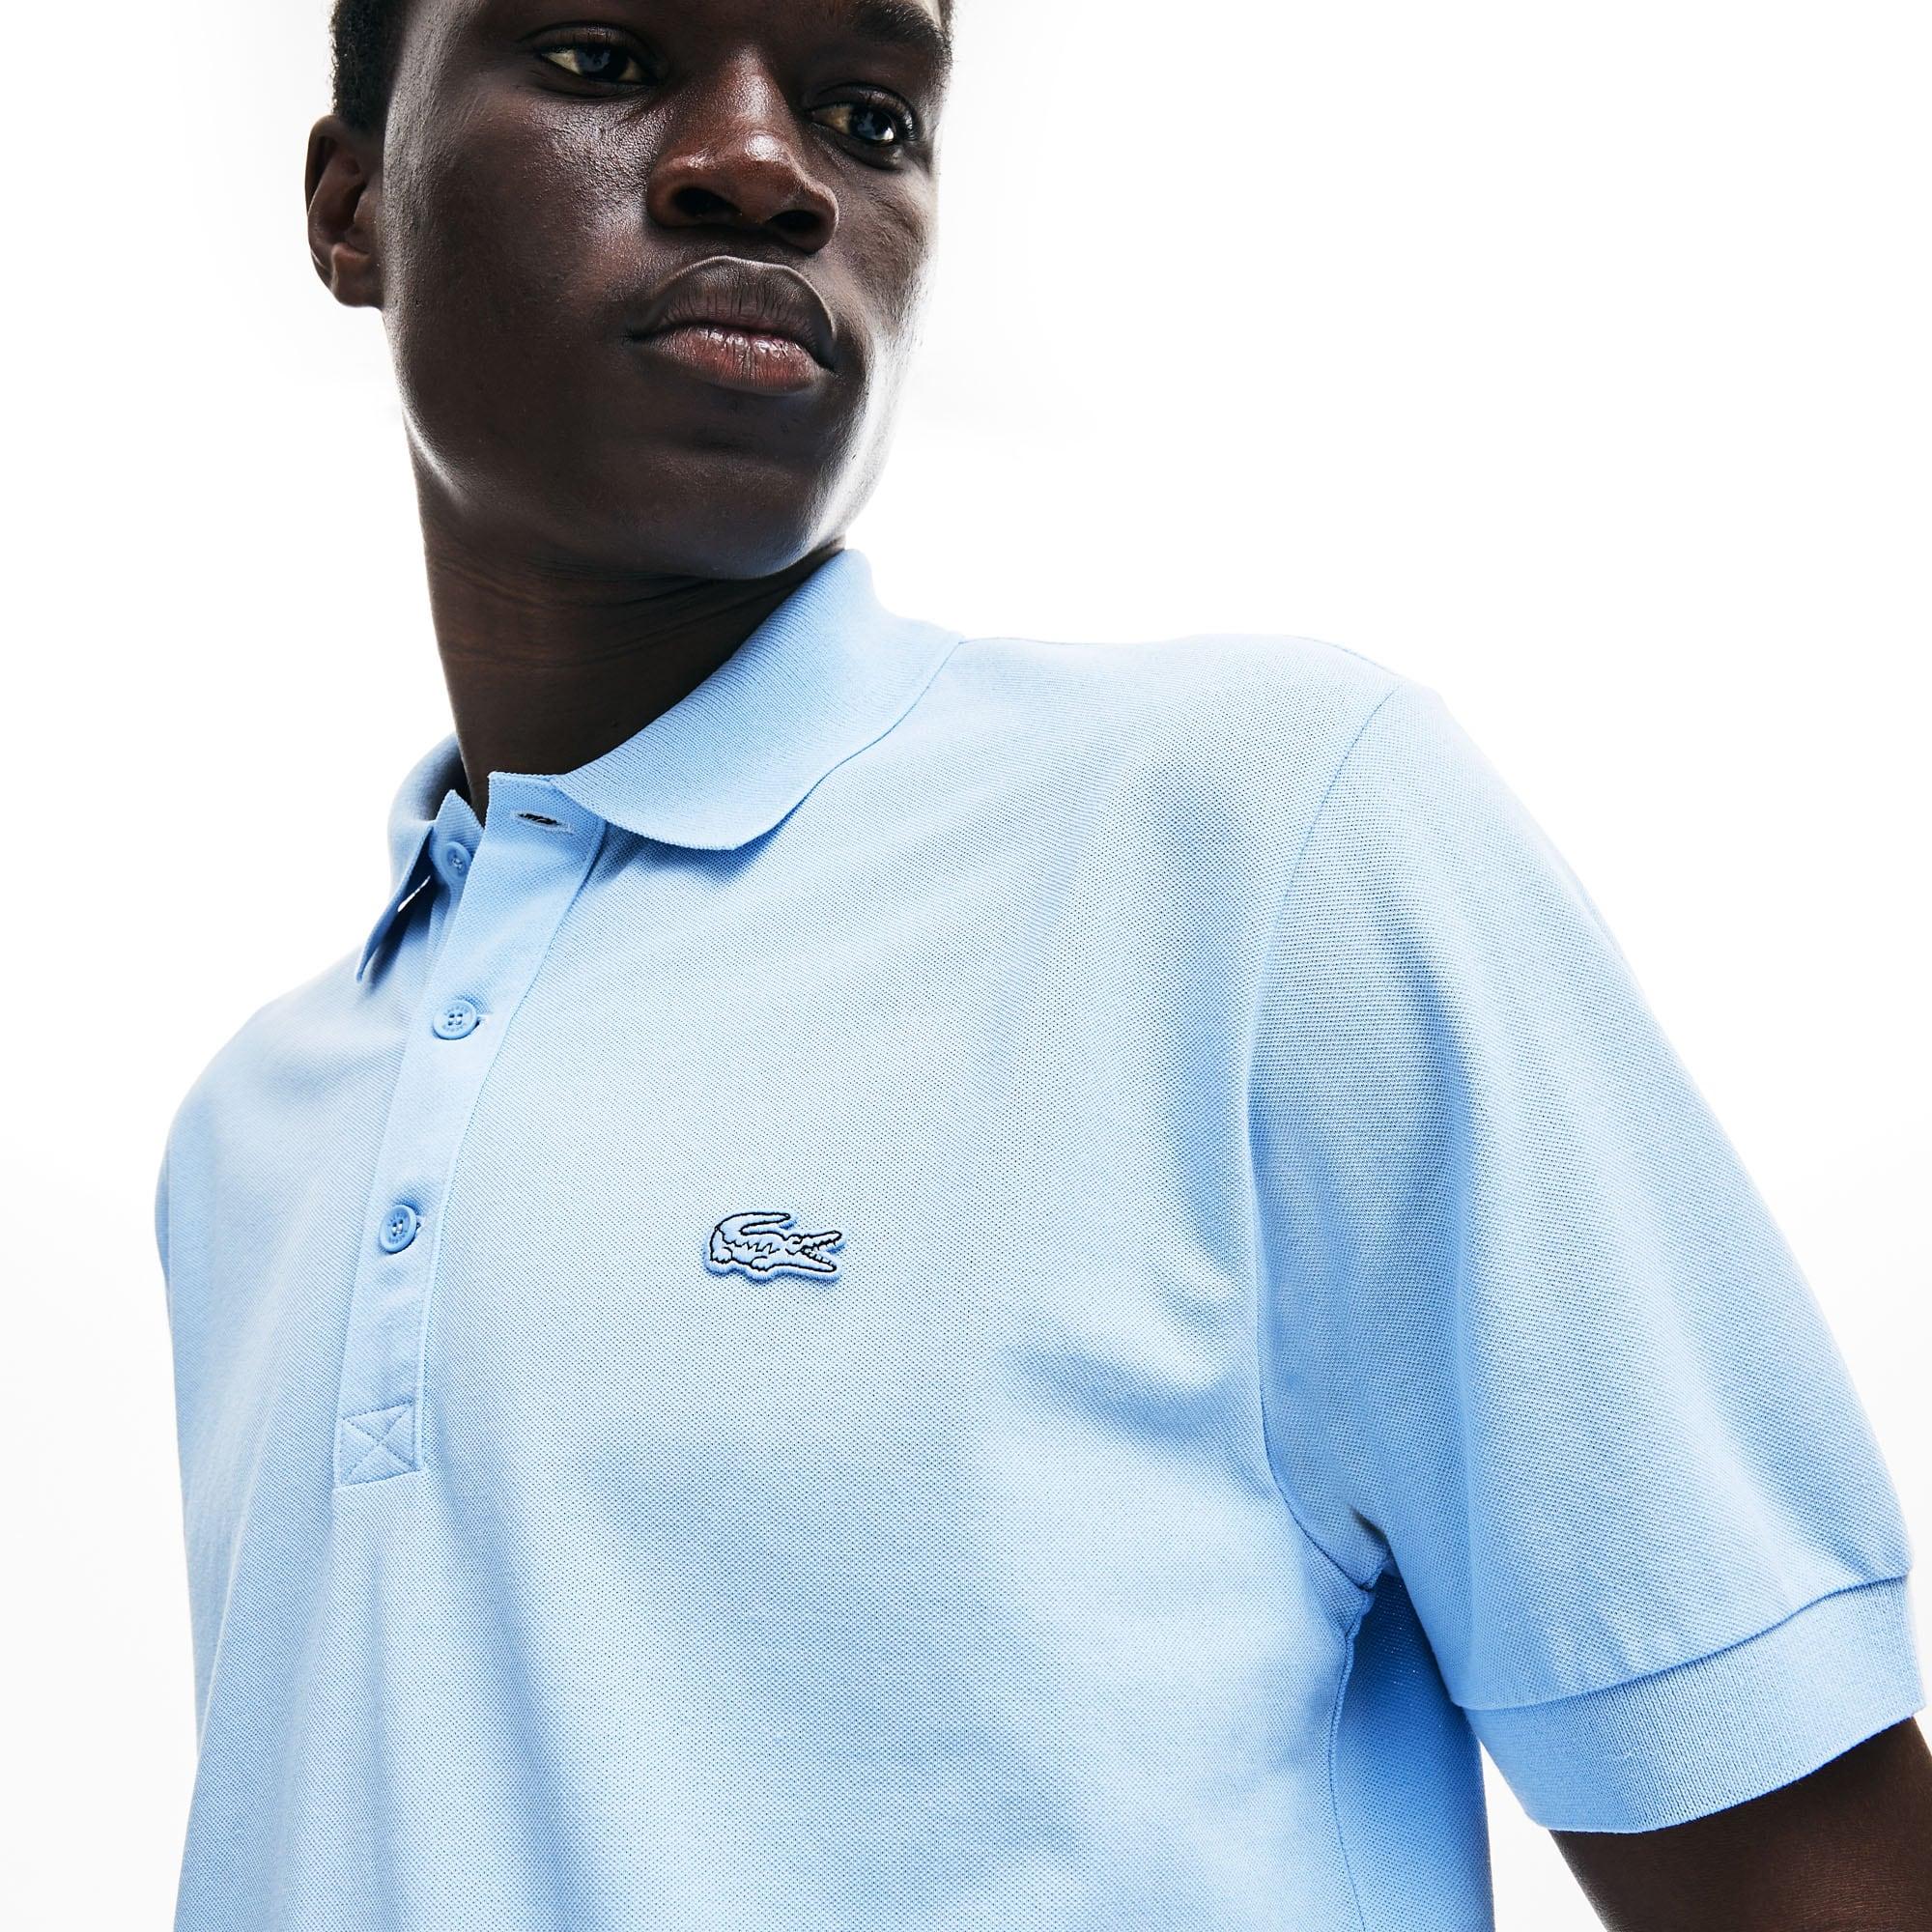 Lacoste Riviera Polo Outlet, SAVE 51%.